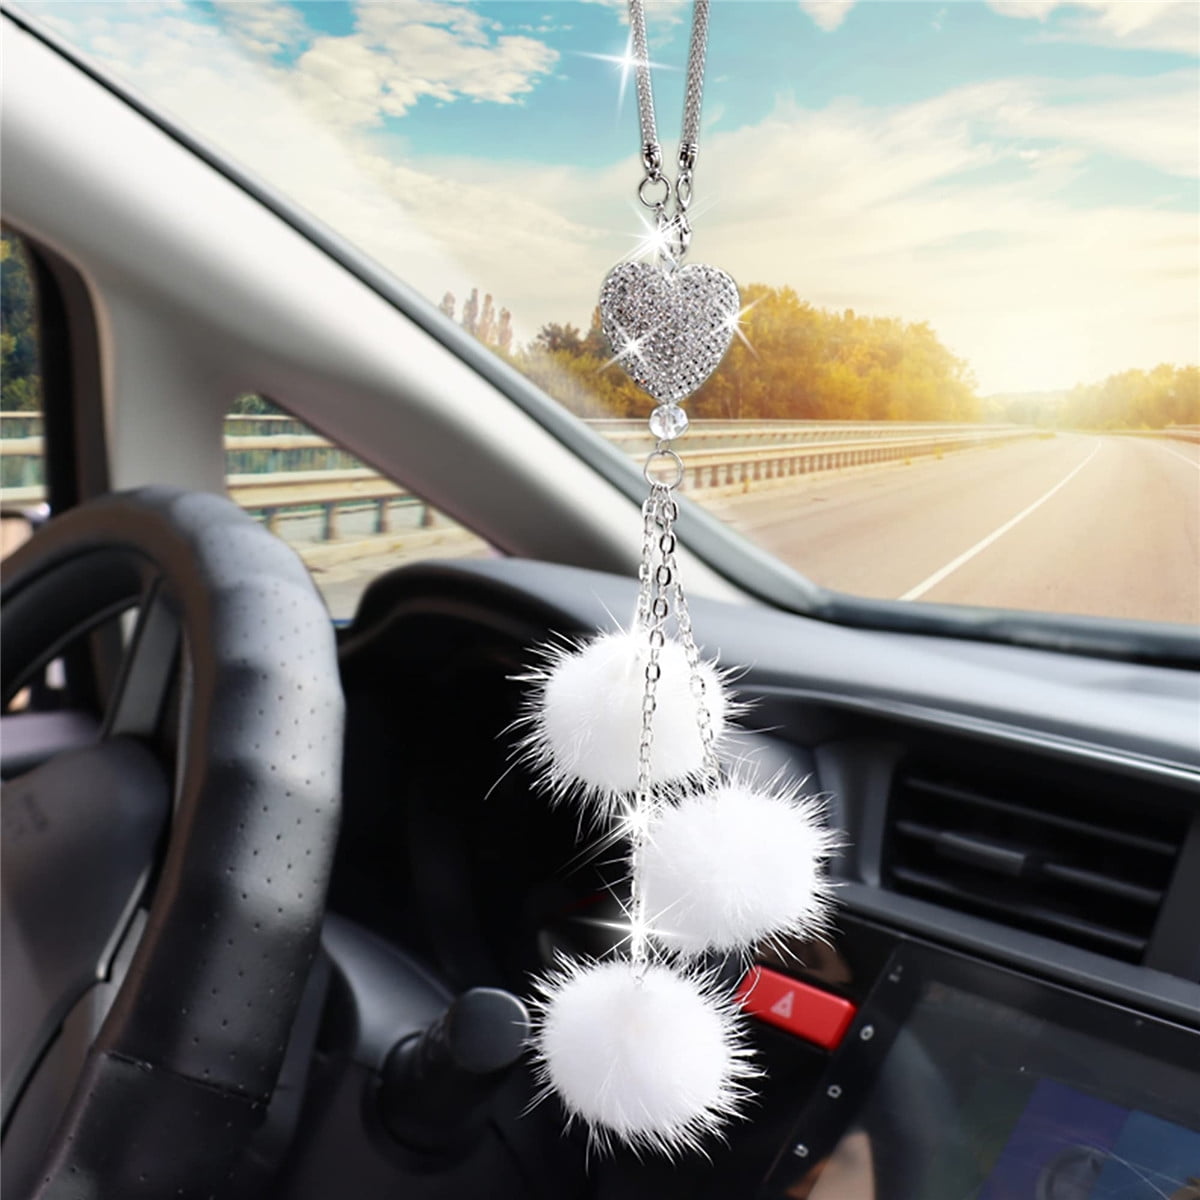 Rearview Mirror Charms - Car Mirror Accessories, Natural Life